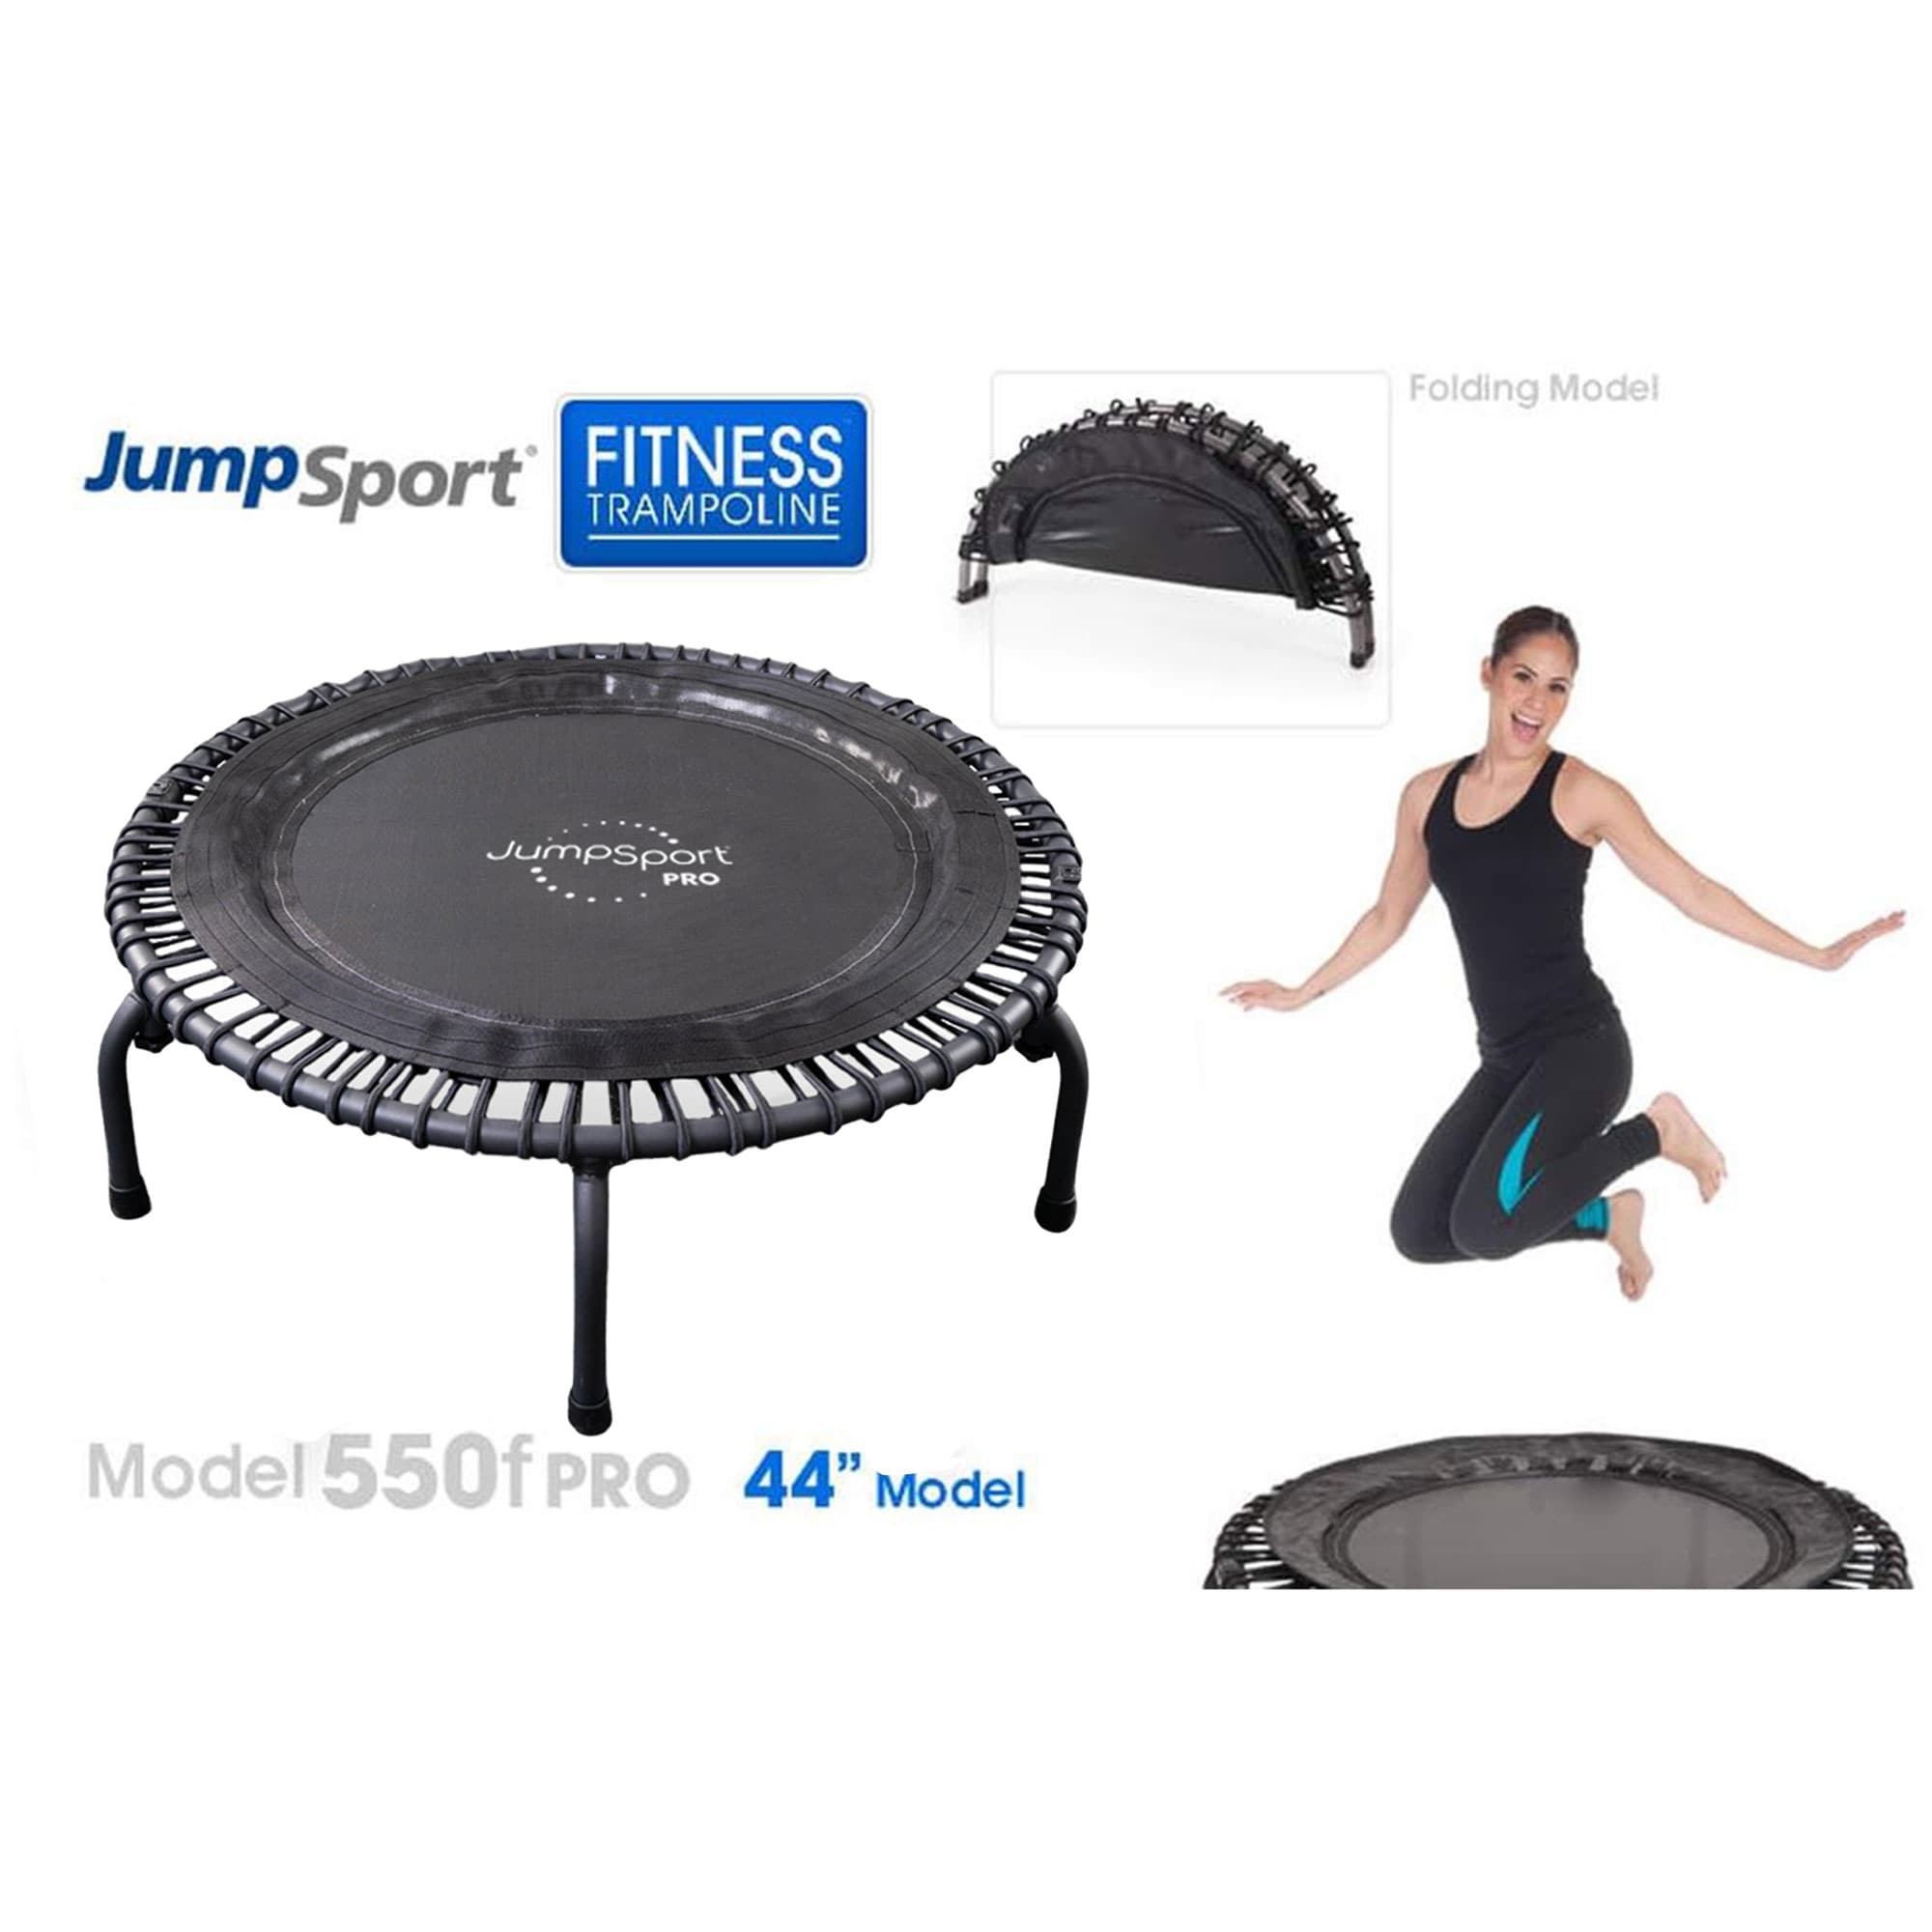 JumpSport 250 Durable 35.5 Cardio Workout Home Gym Fitness Trampoline 